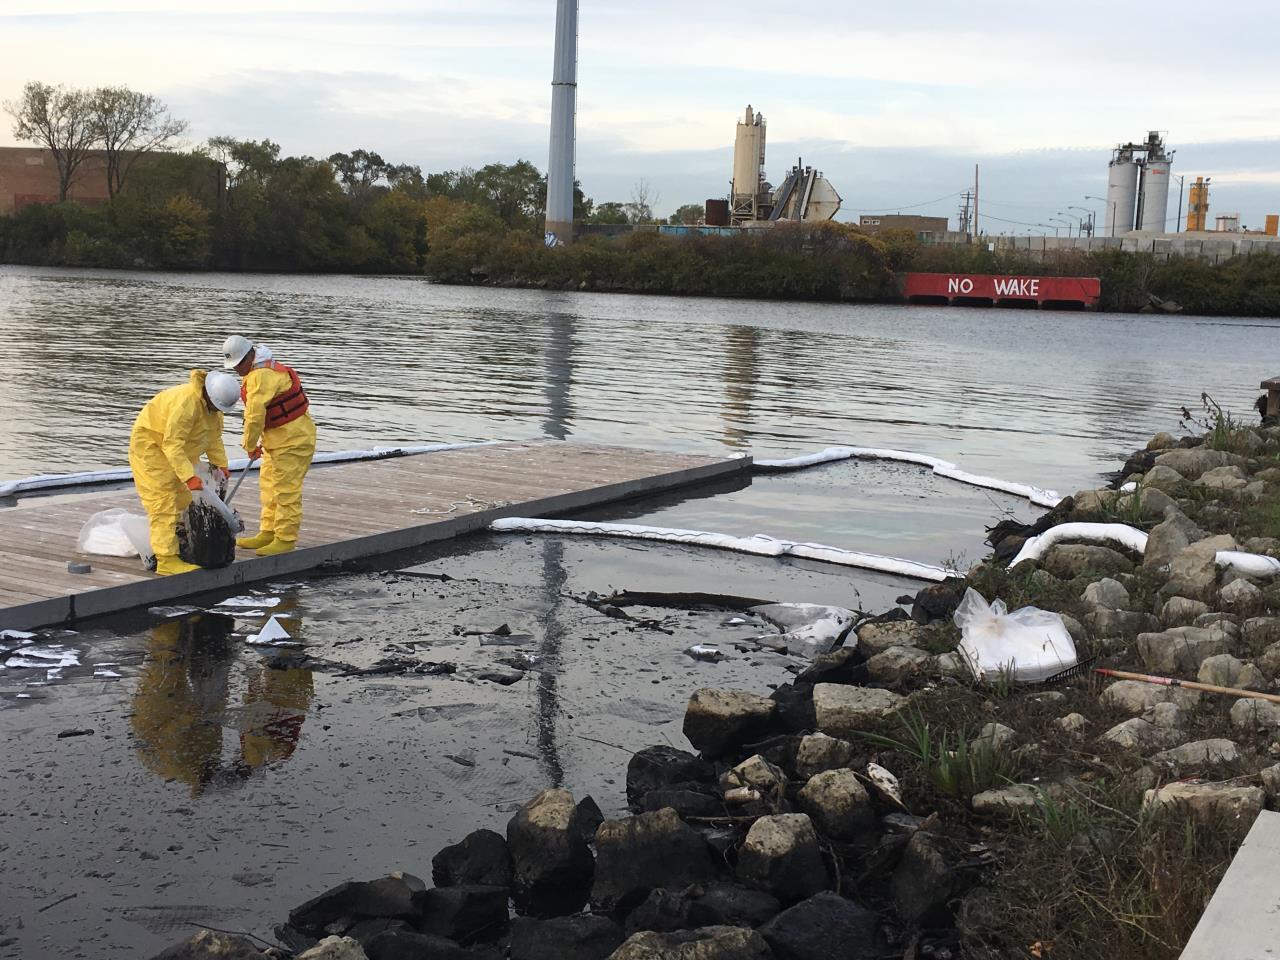 Workers from the Environmental Protection Agency respond to an oil spill Oct. 26 at a fork of the Chicago River known as Bubbly Creek. (EPA) 